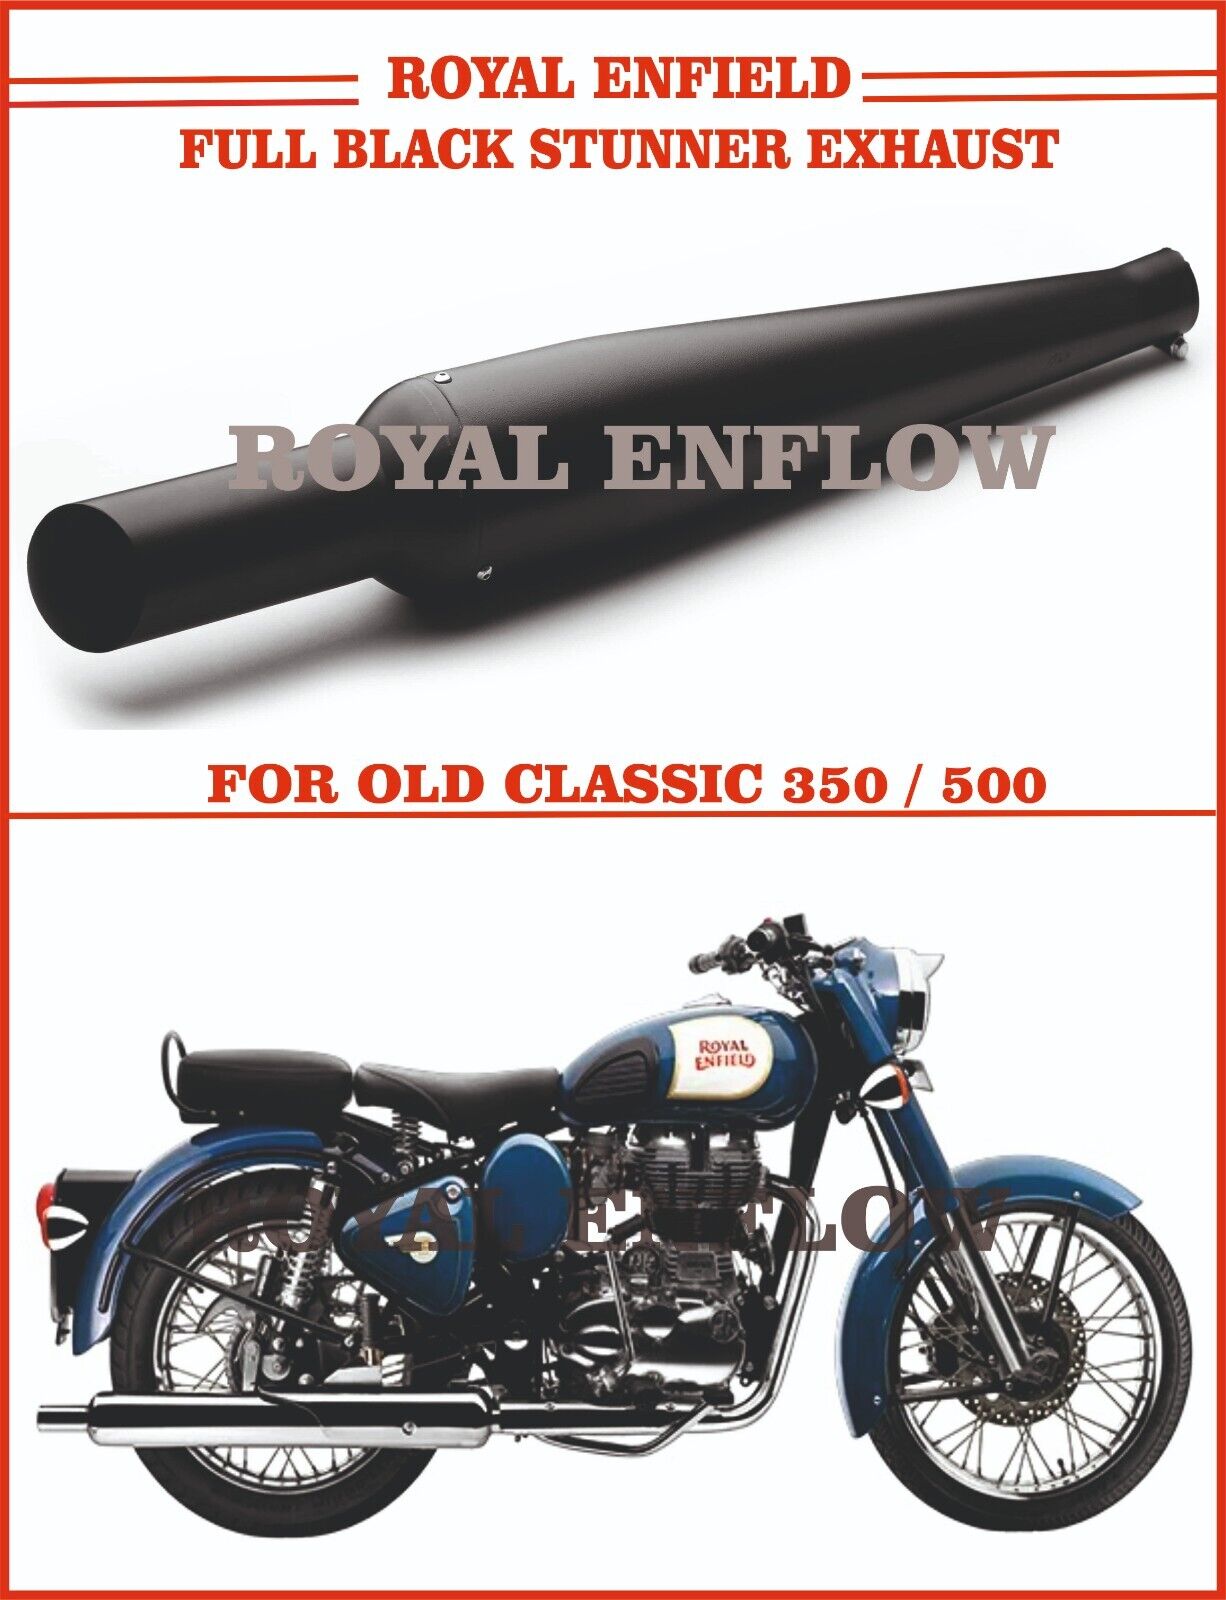 Royal Enfield Full Black Stunner Exhaust for Old Classic 350/500 - Exp Ship